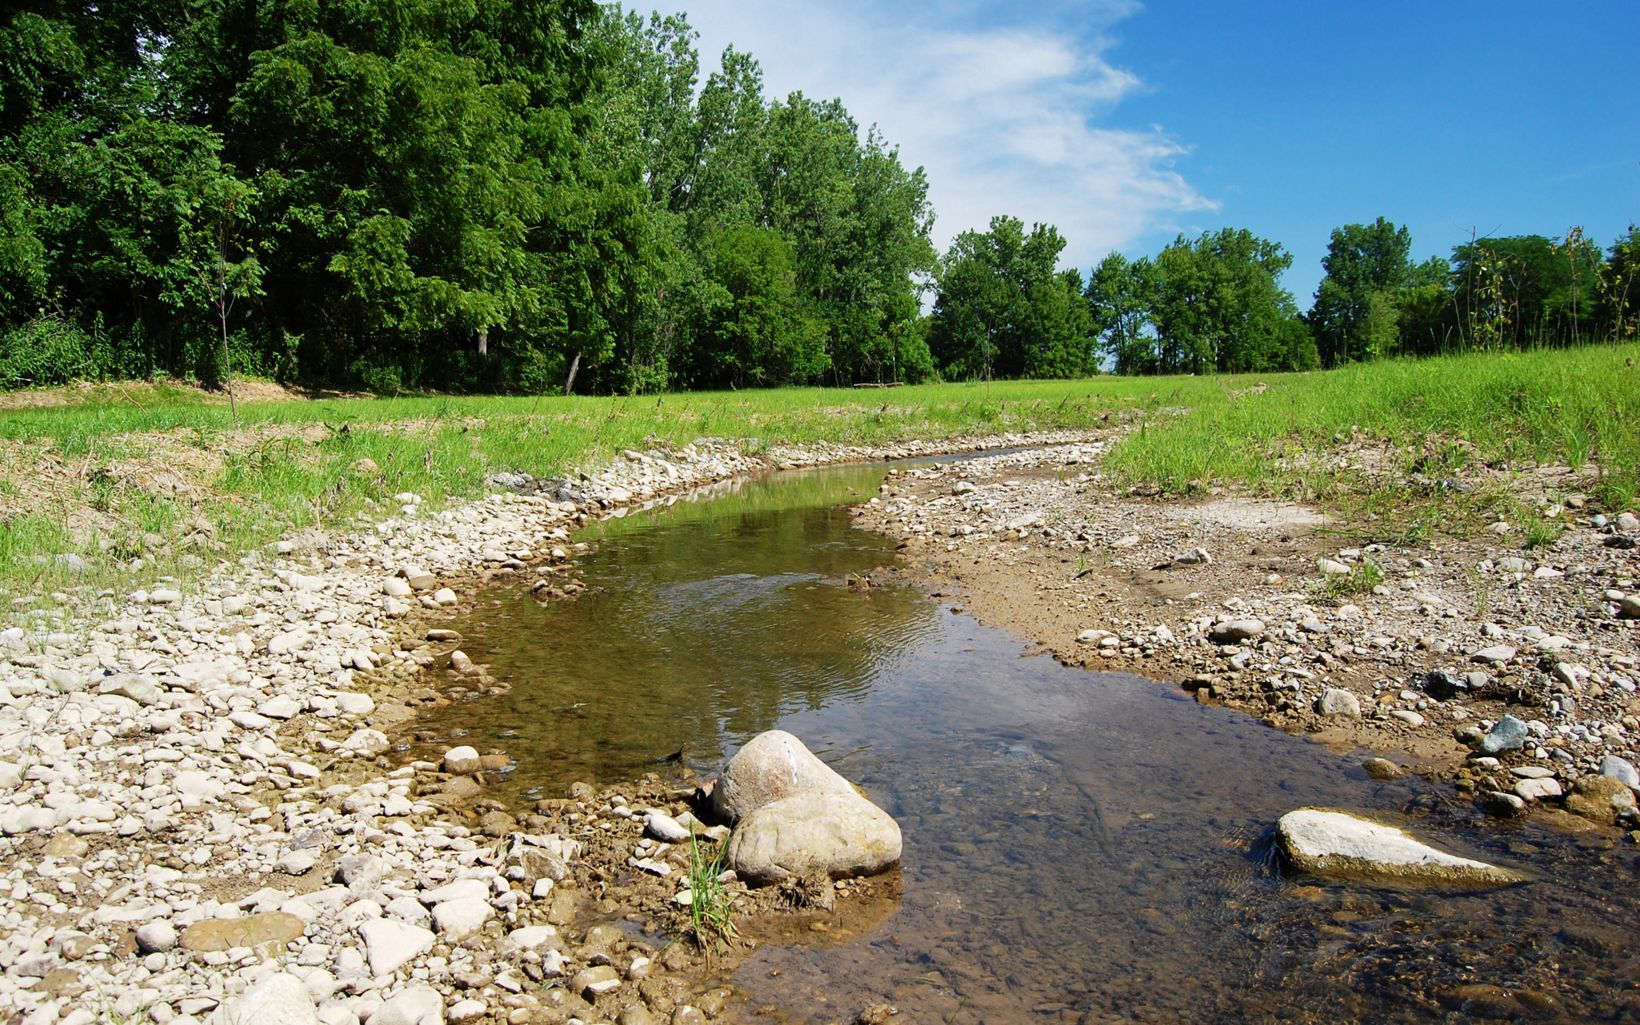 Big Darby Stream Restoration In 2011, TNC completed a 4-yr. project of restoring 7,000 feet of stream. A drainage ditch was restored to a meandering stream with improved aquatic habitat and water quality. © Anthony Sasson/TNC